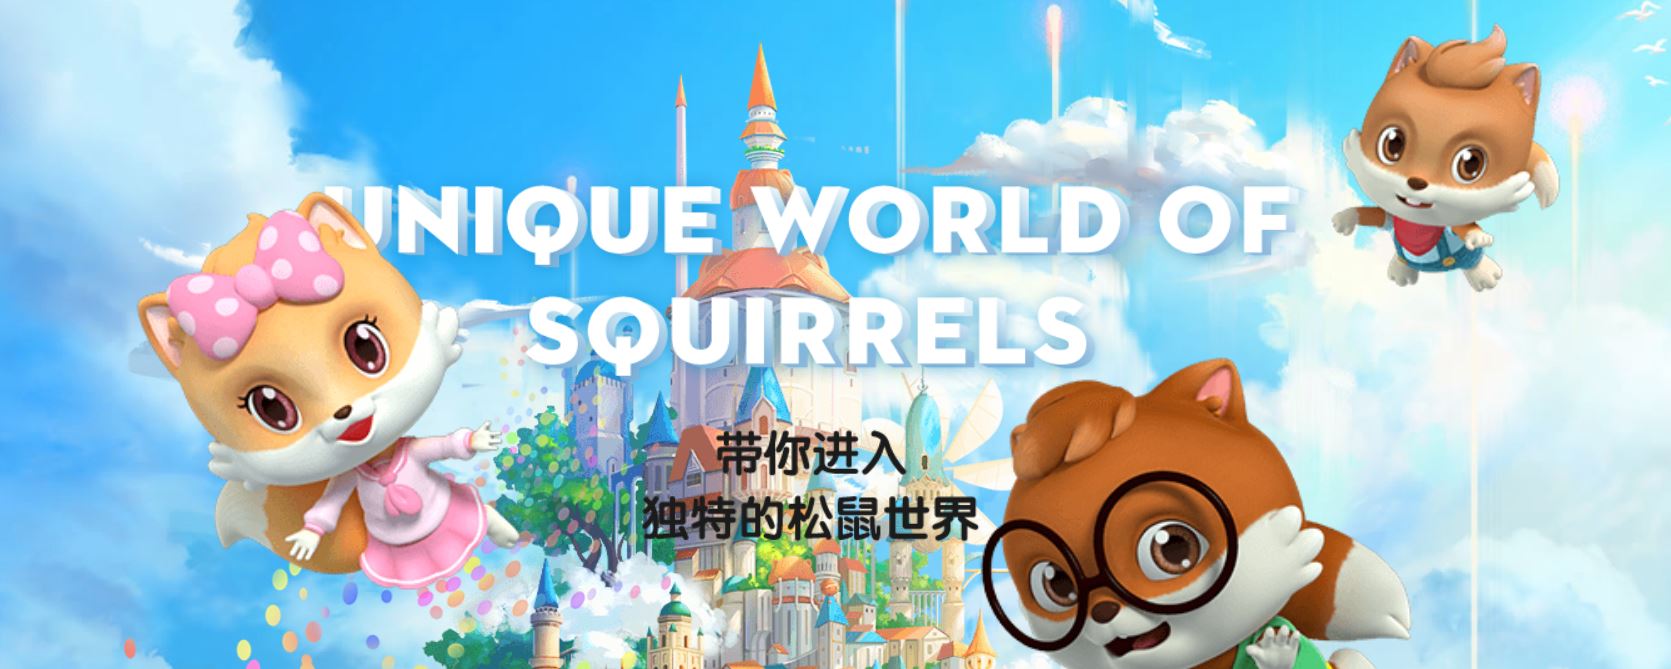 How the Chinese brand “Three squirrels” uses Meng Culture to become No. 1 | Daxue Consulting